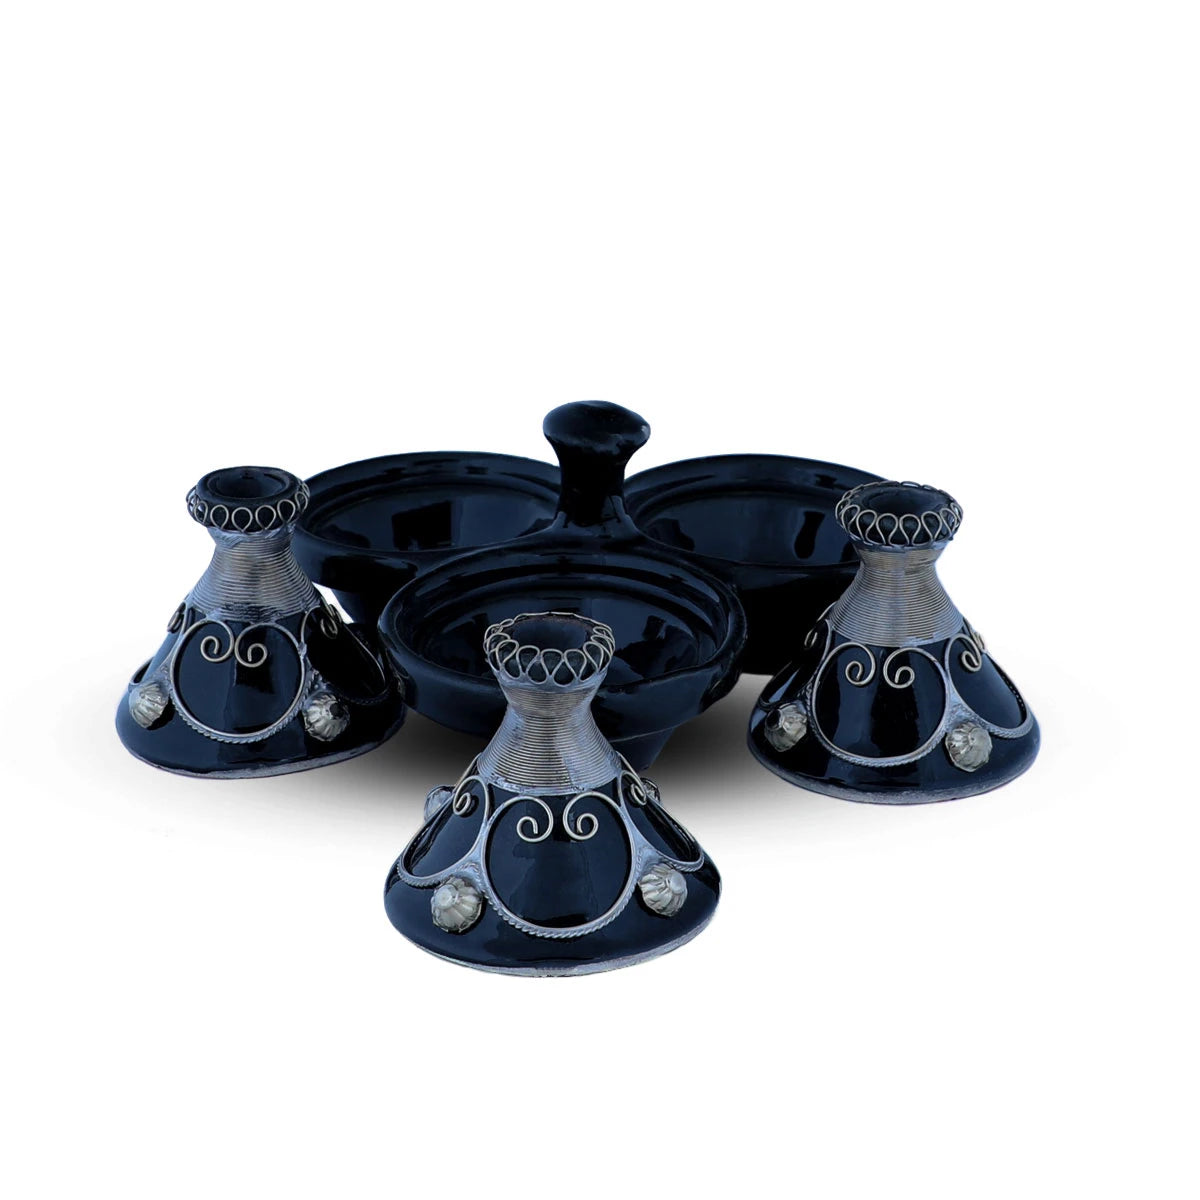 Flat View of Blue Colored Three Moroccan Tagine Set with open lids